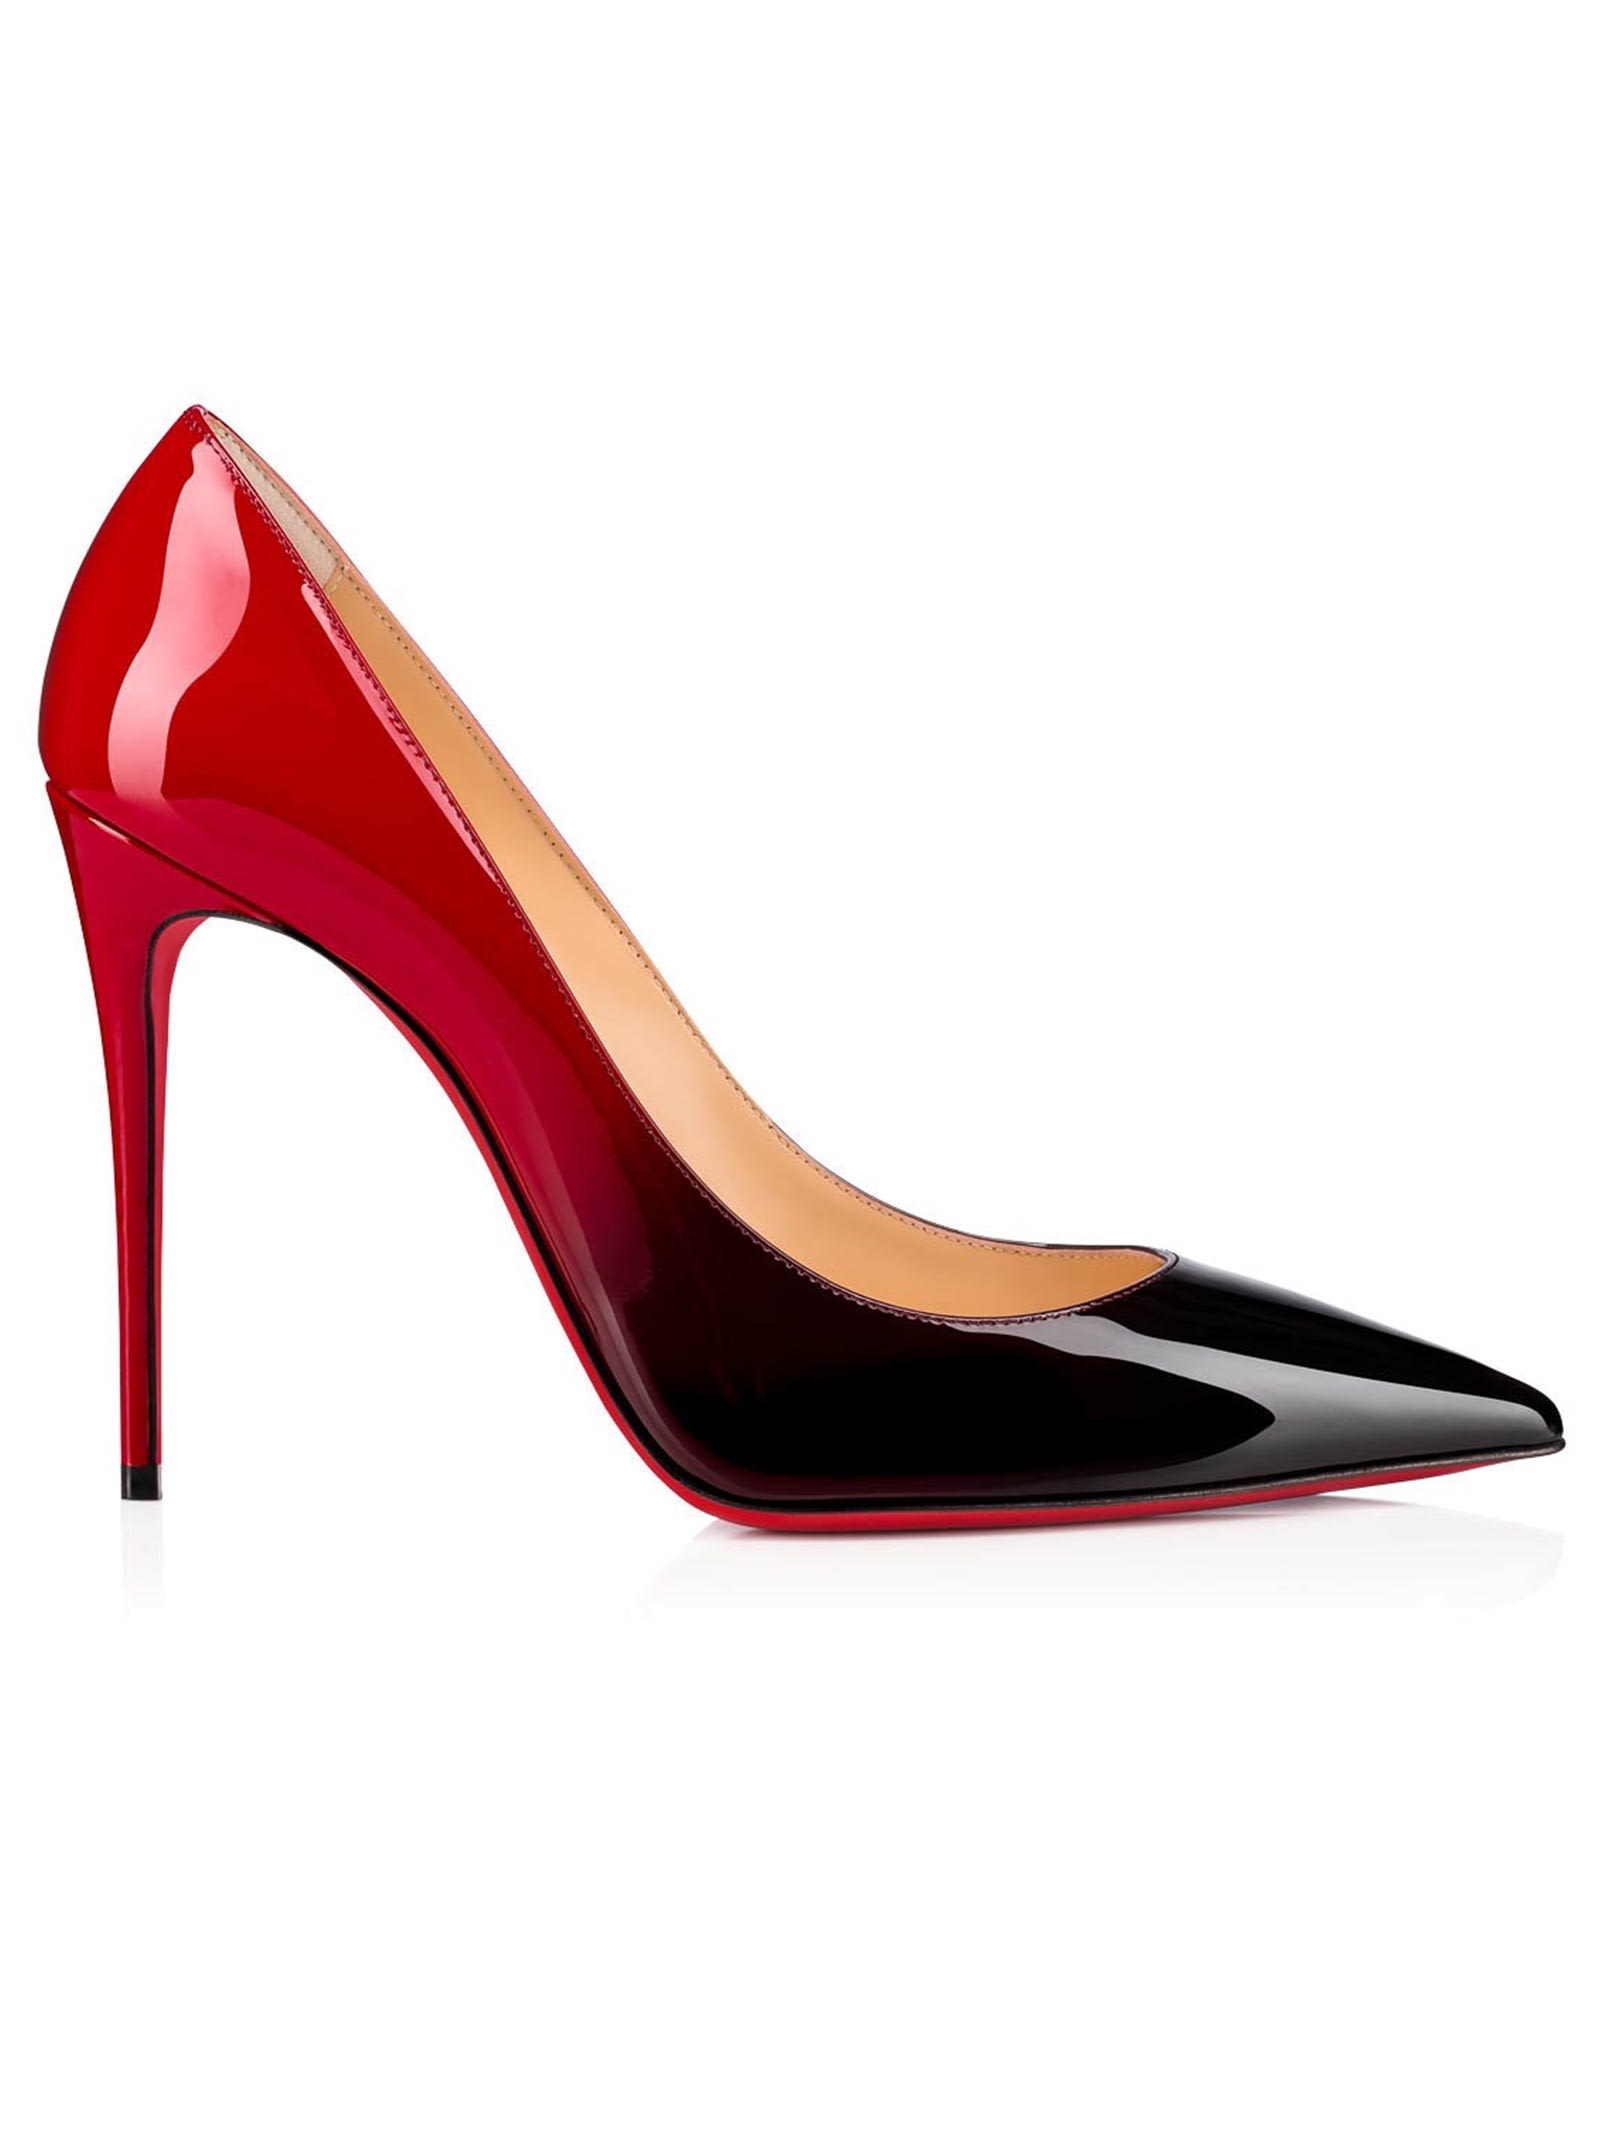 Buy Christian Louboutin Black - Red Degrade Patent Kate 100 Pumps online, shop Christian Louboutin shoes with free shipping